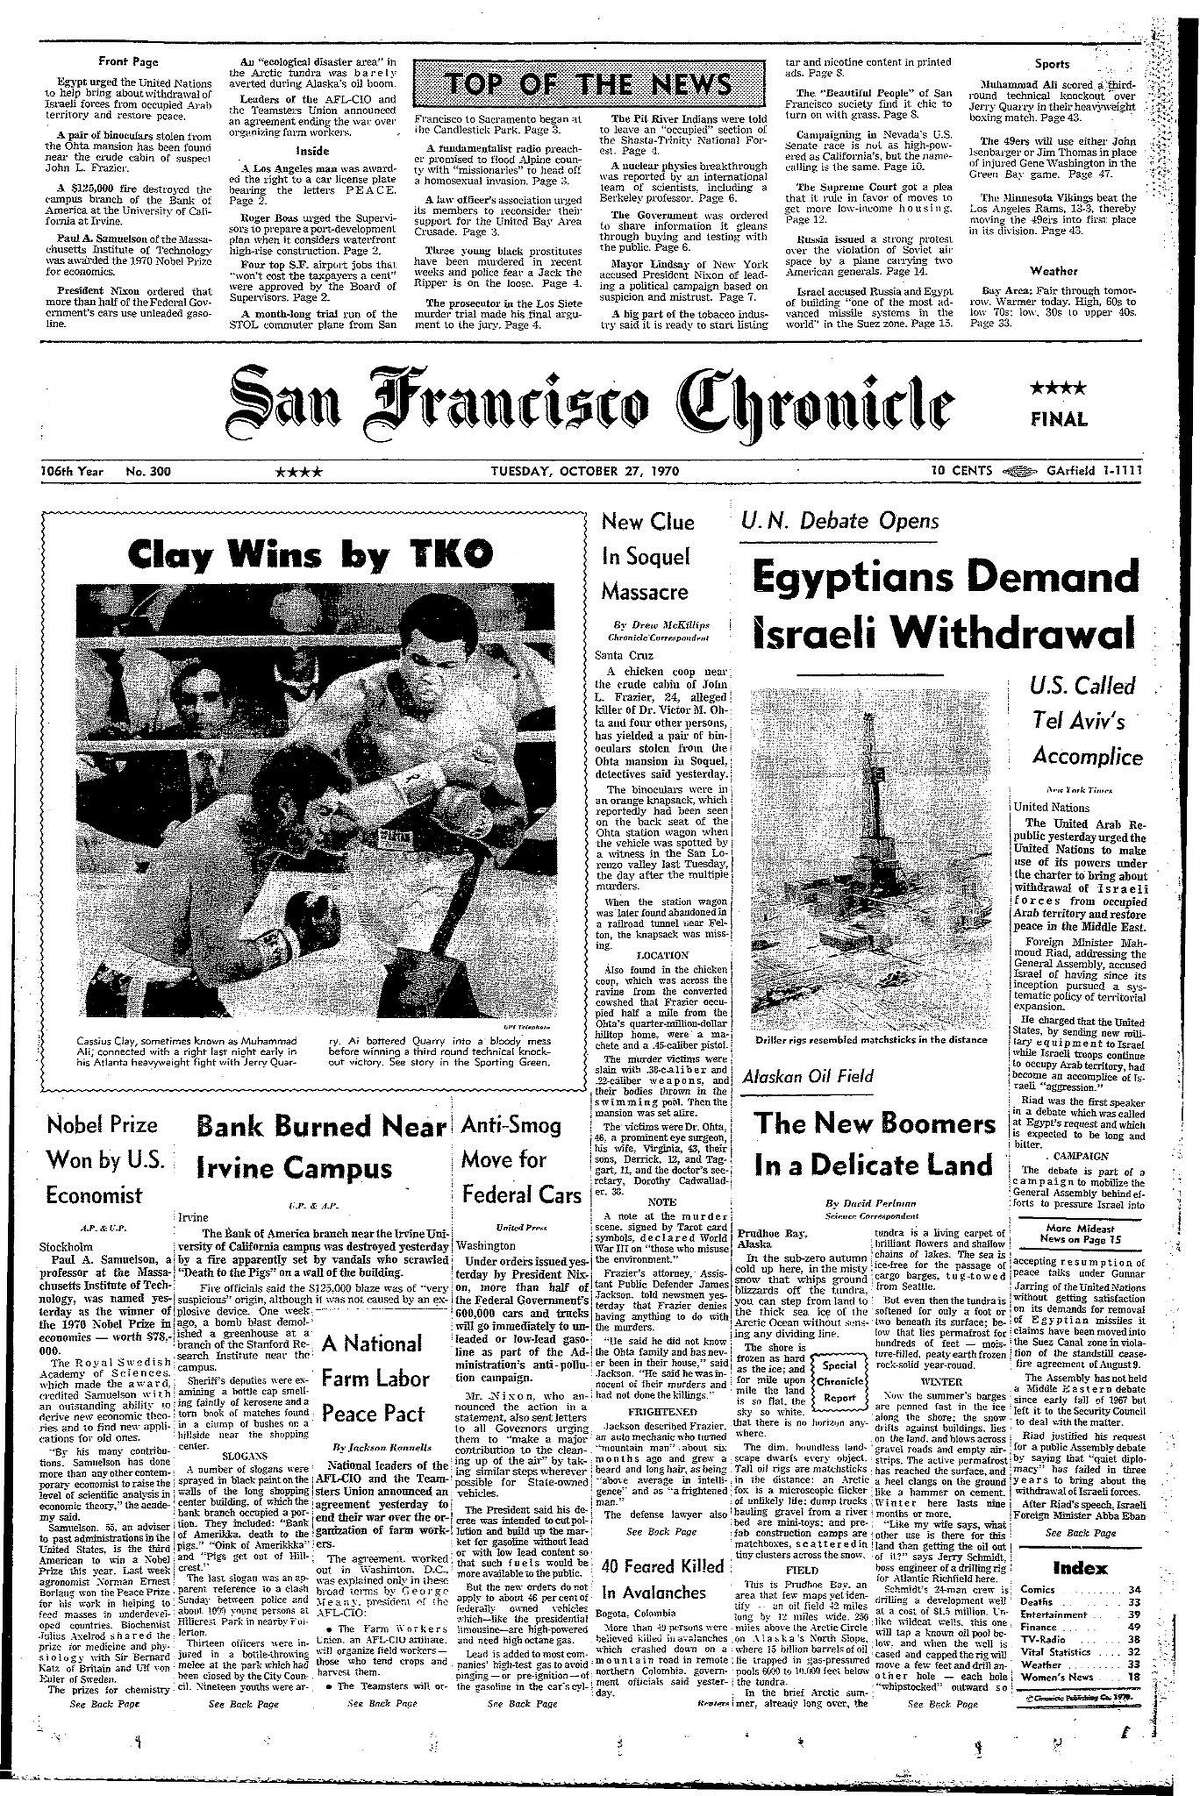 Historic Chronicle Front Page October 27, 1970 front page Cassius Clay, who would change his name to Muhhamad Ali, beat Jerry Quarry in first fight after serving time in prison for refusing to be drafted for military service Chron365, Chroncover